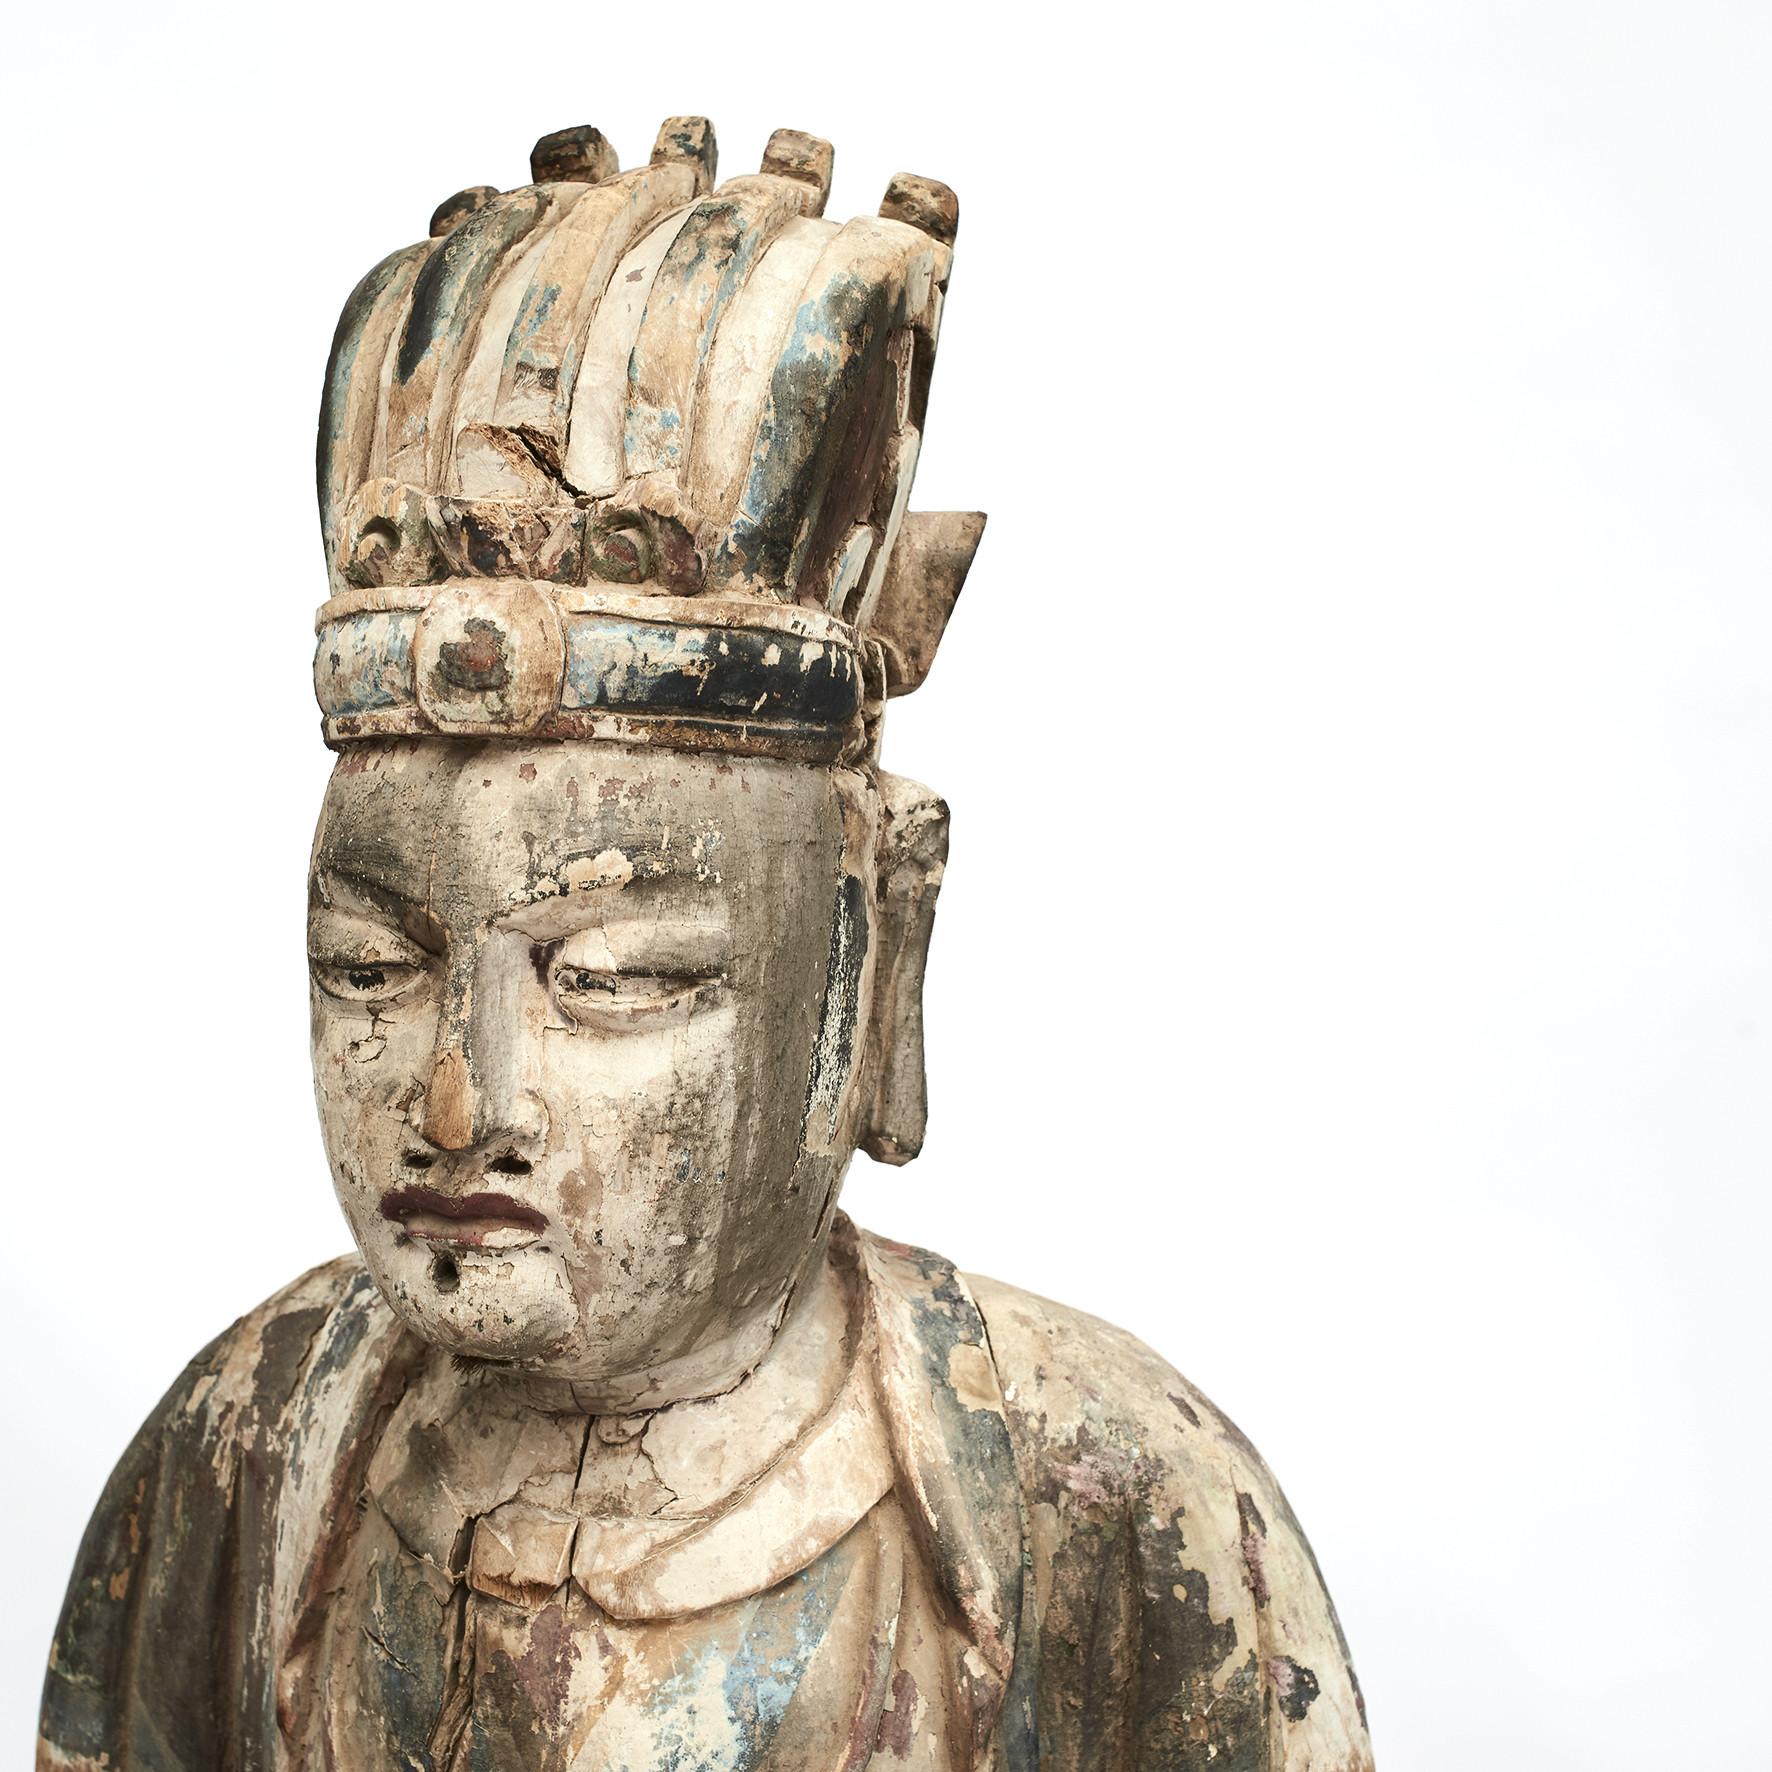 Polychromed 18th Century Chinese Carved and Painted Wood Figure of a Chinese Official